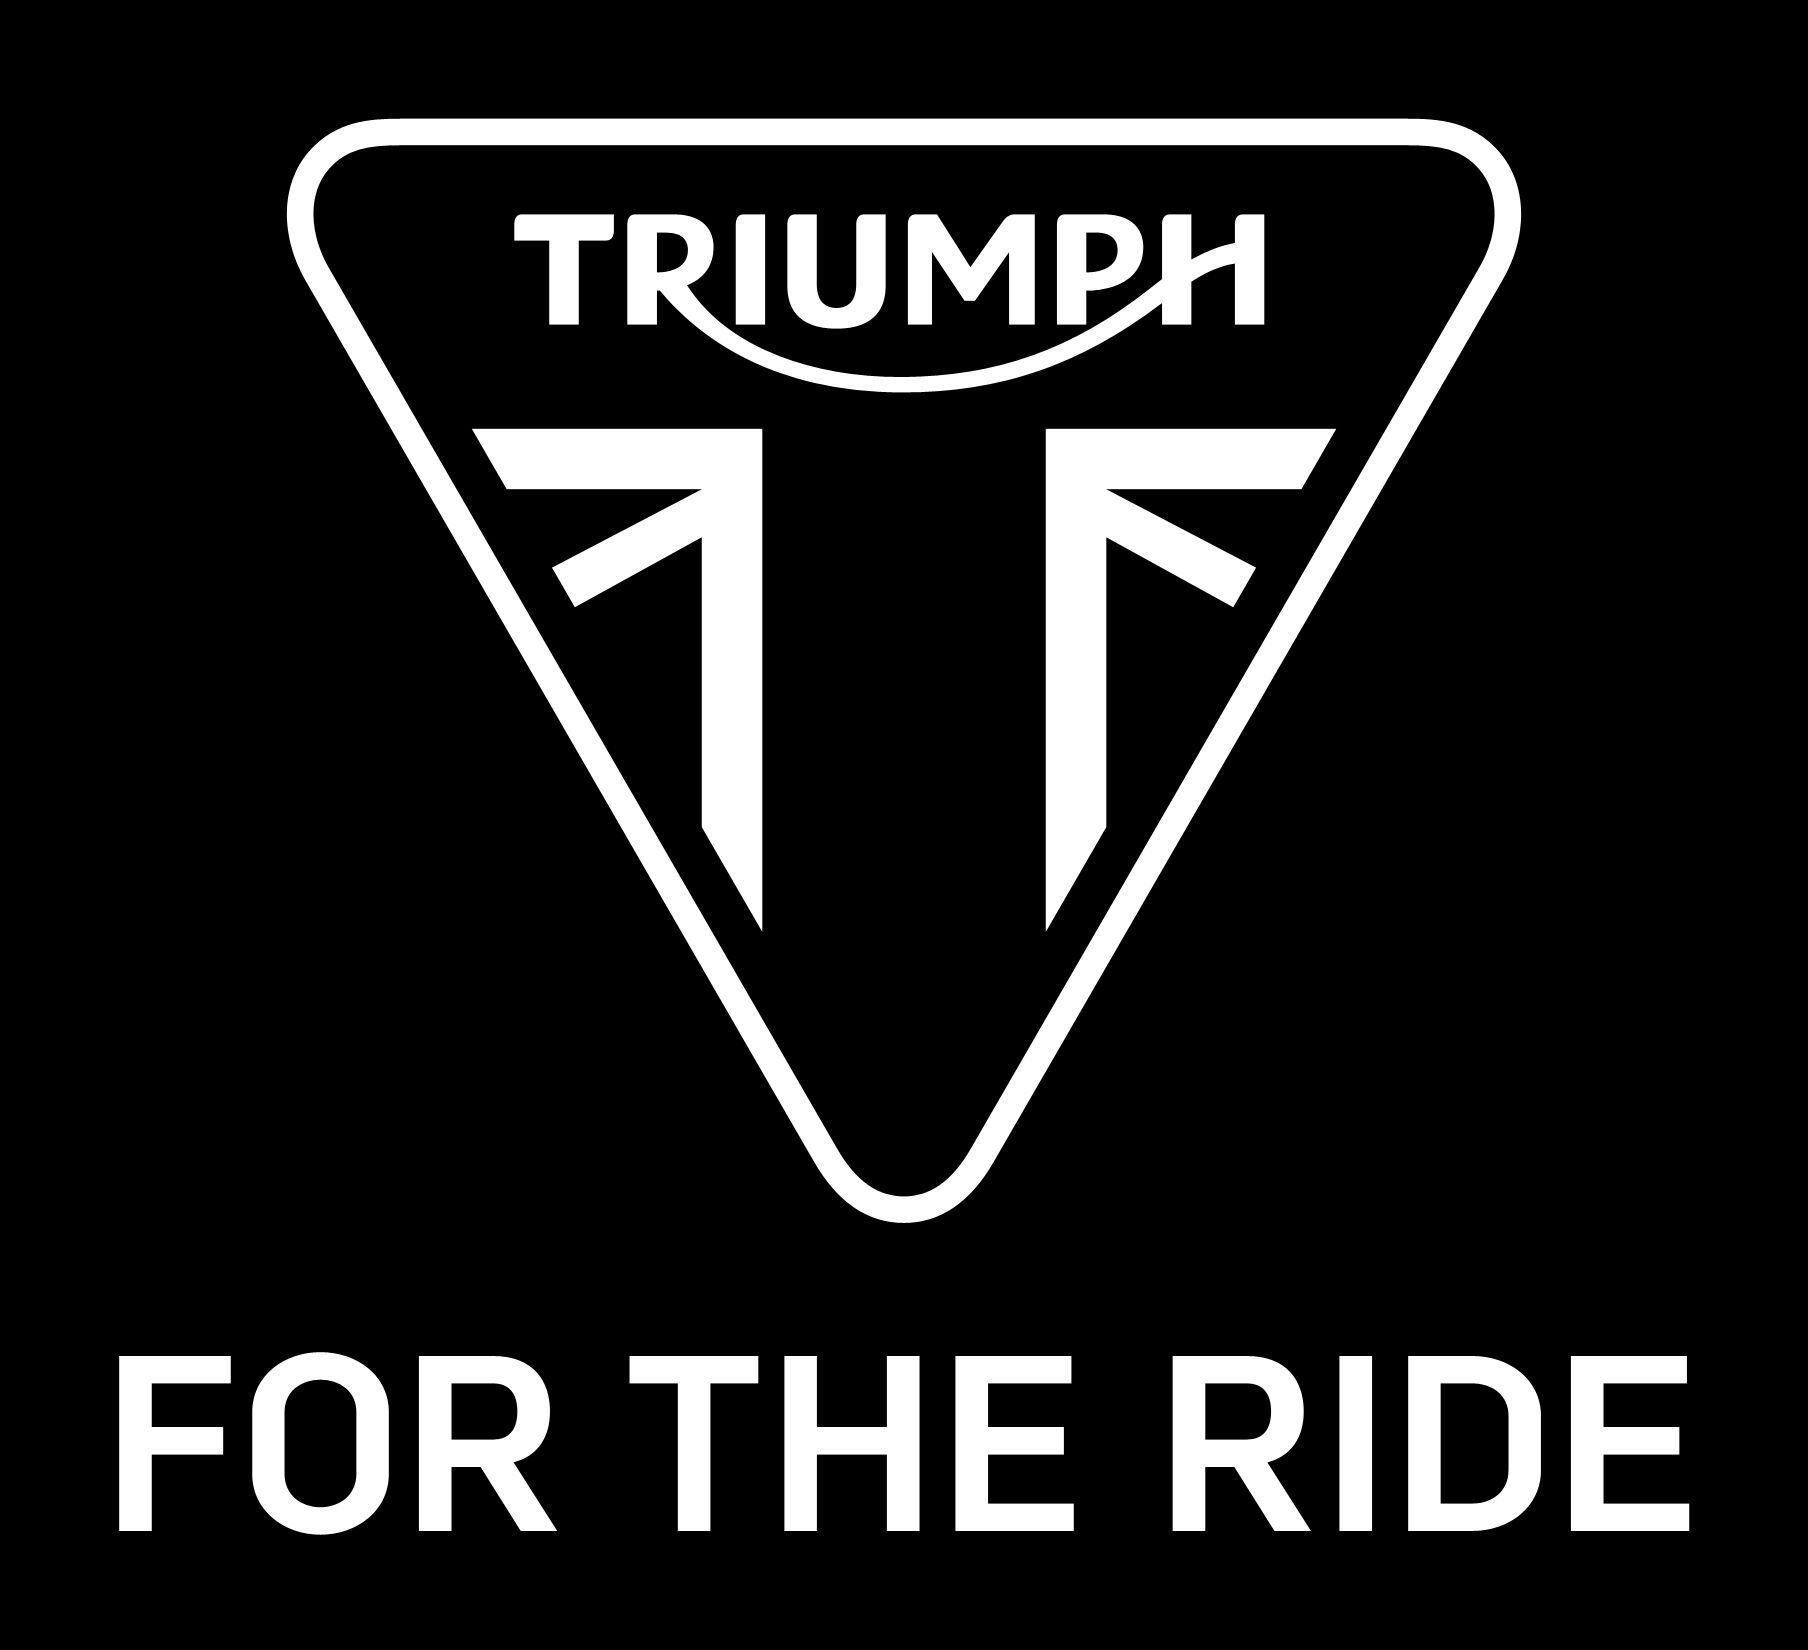 Triumph says the purchase of Oset Bikes helps fuel its core philosophy, “For the Ride,” which is all about inspiring new and experienced riders alike to get out there and ride more.